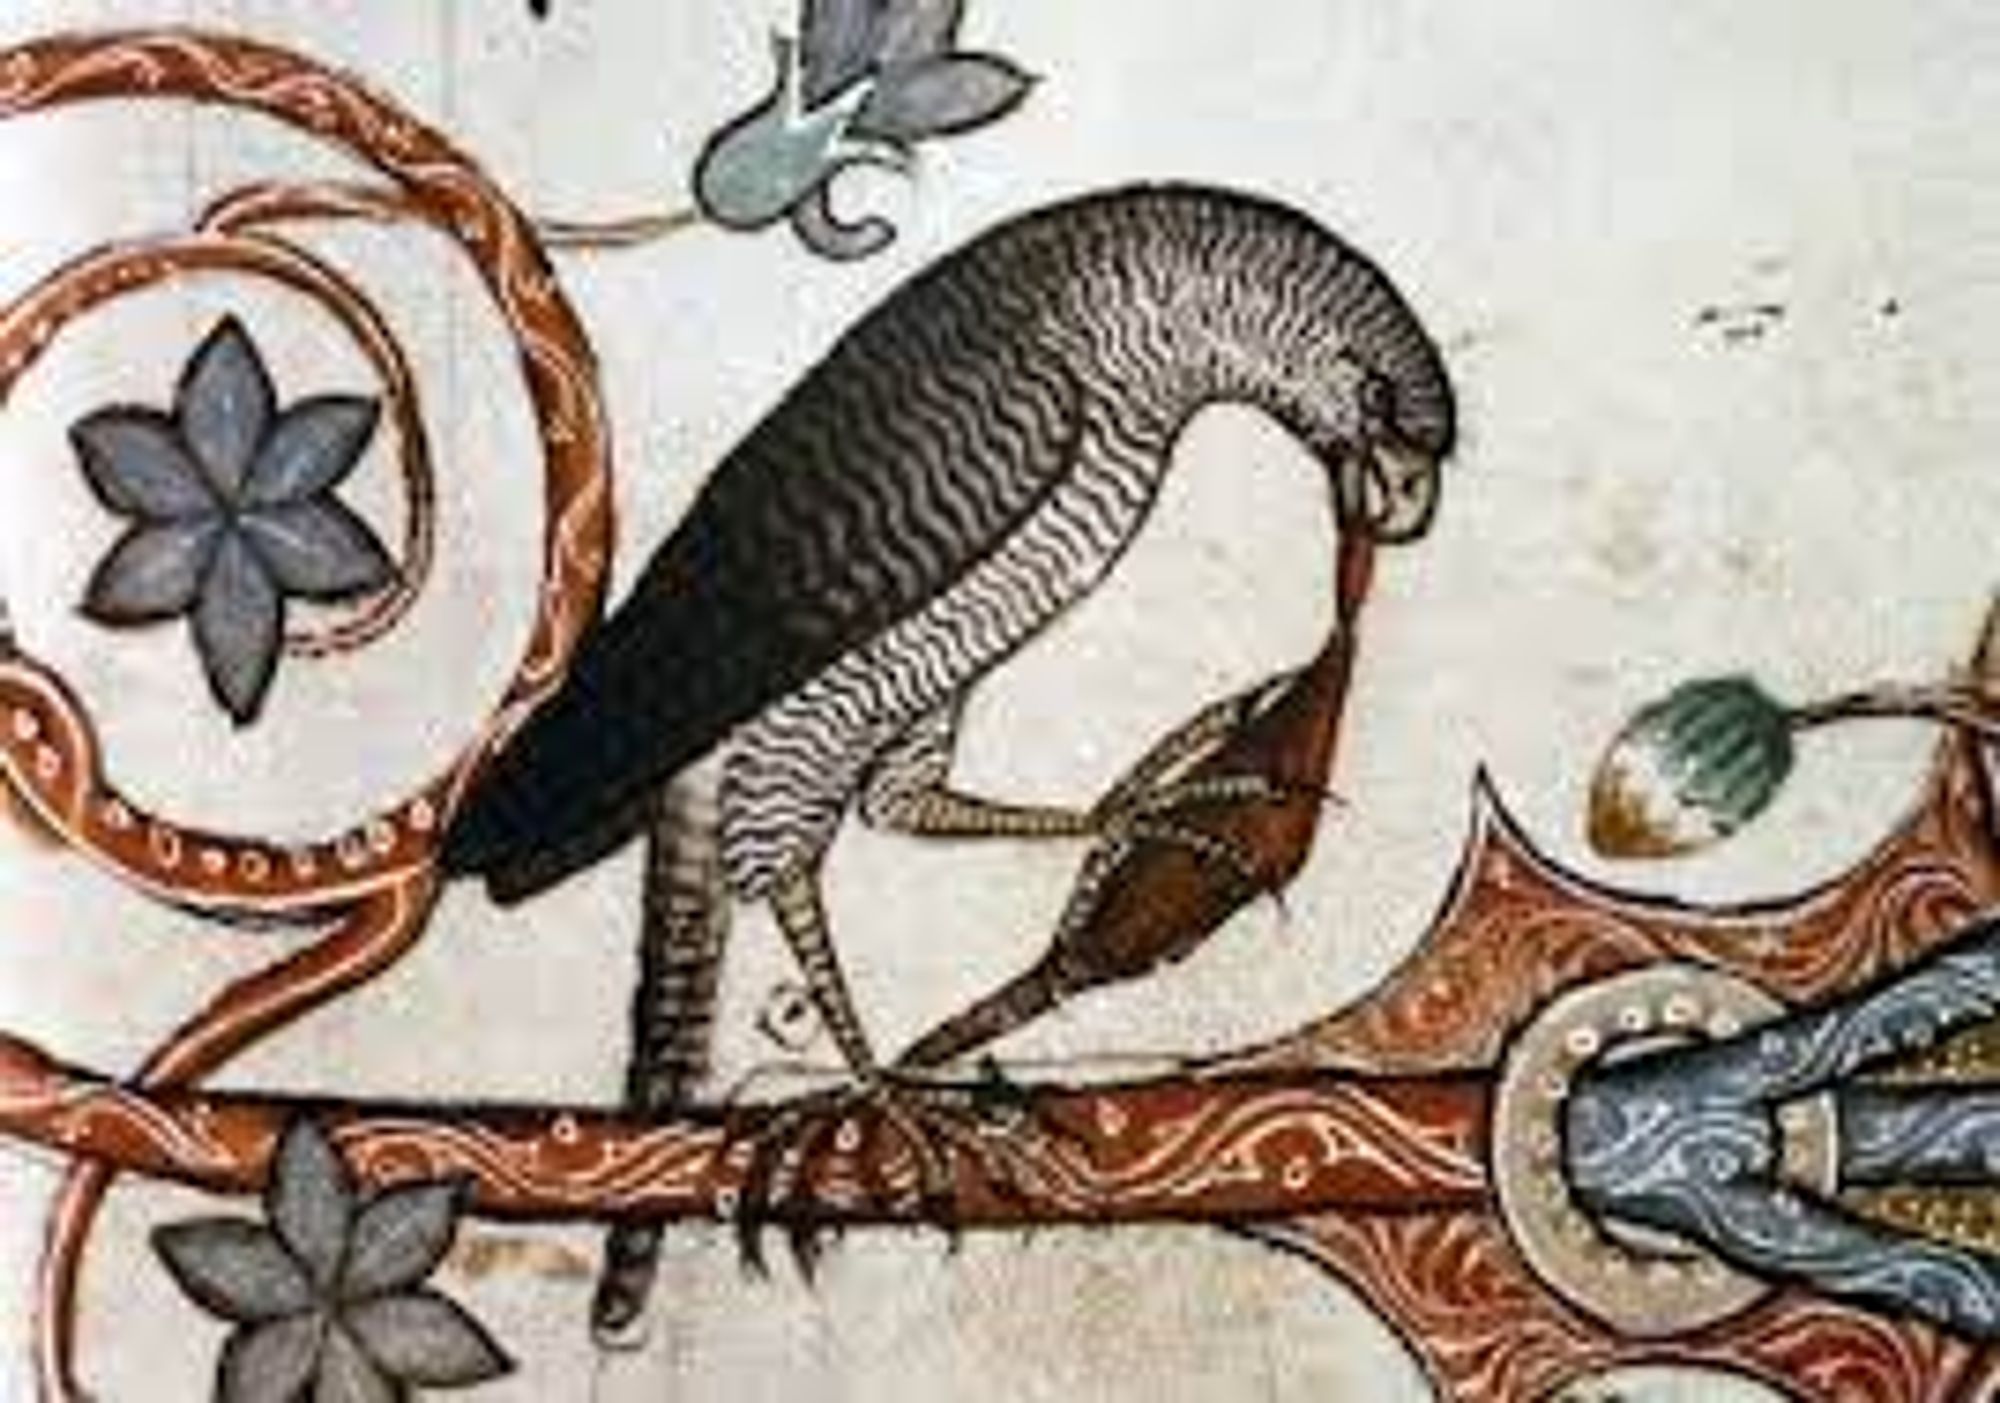 Medieval manuscript illustration of a falcon eating a small rodent.